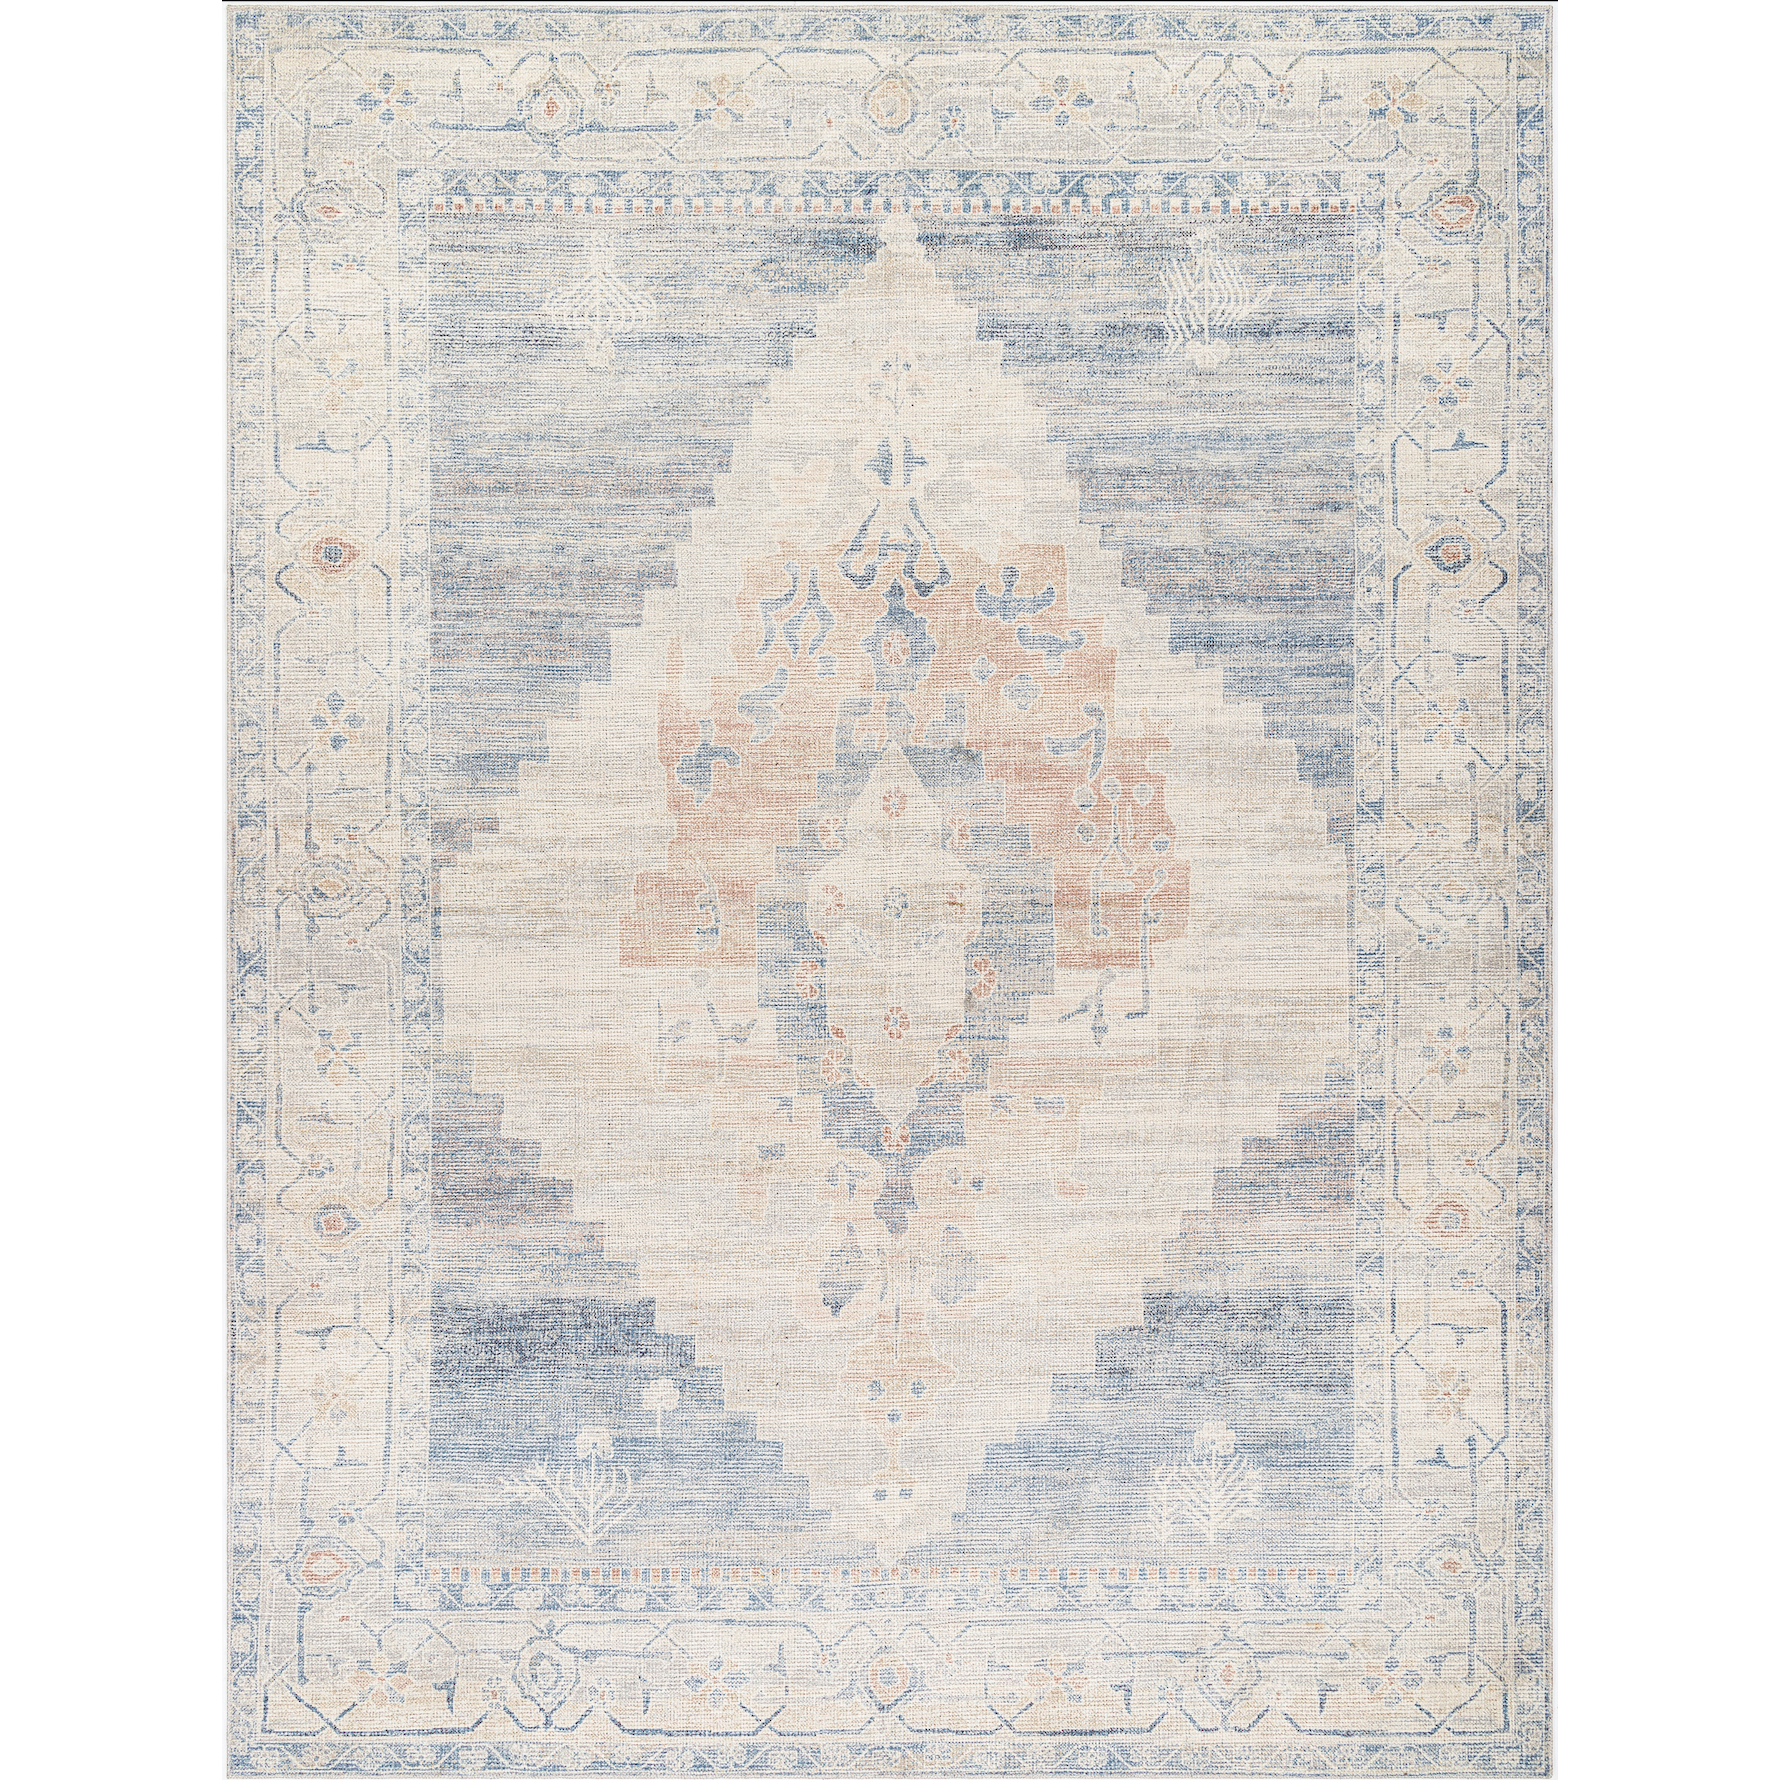 The Luca Pewter Medallion Rug from Becki Owens x Surya is a vintage inspired collection full of rich design and subtle versatile colors that will bring a curated and collected feel to any room. Amethyst Home provides interior design, new construction, custom furniture, and area rugs in the Kansas City metro area.